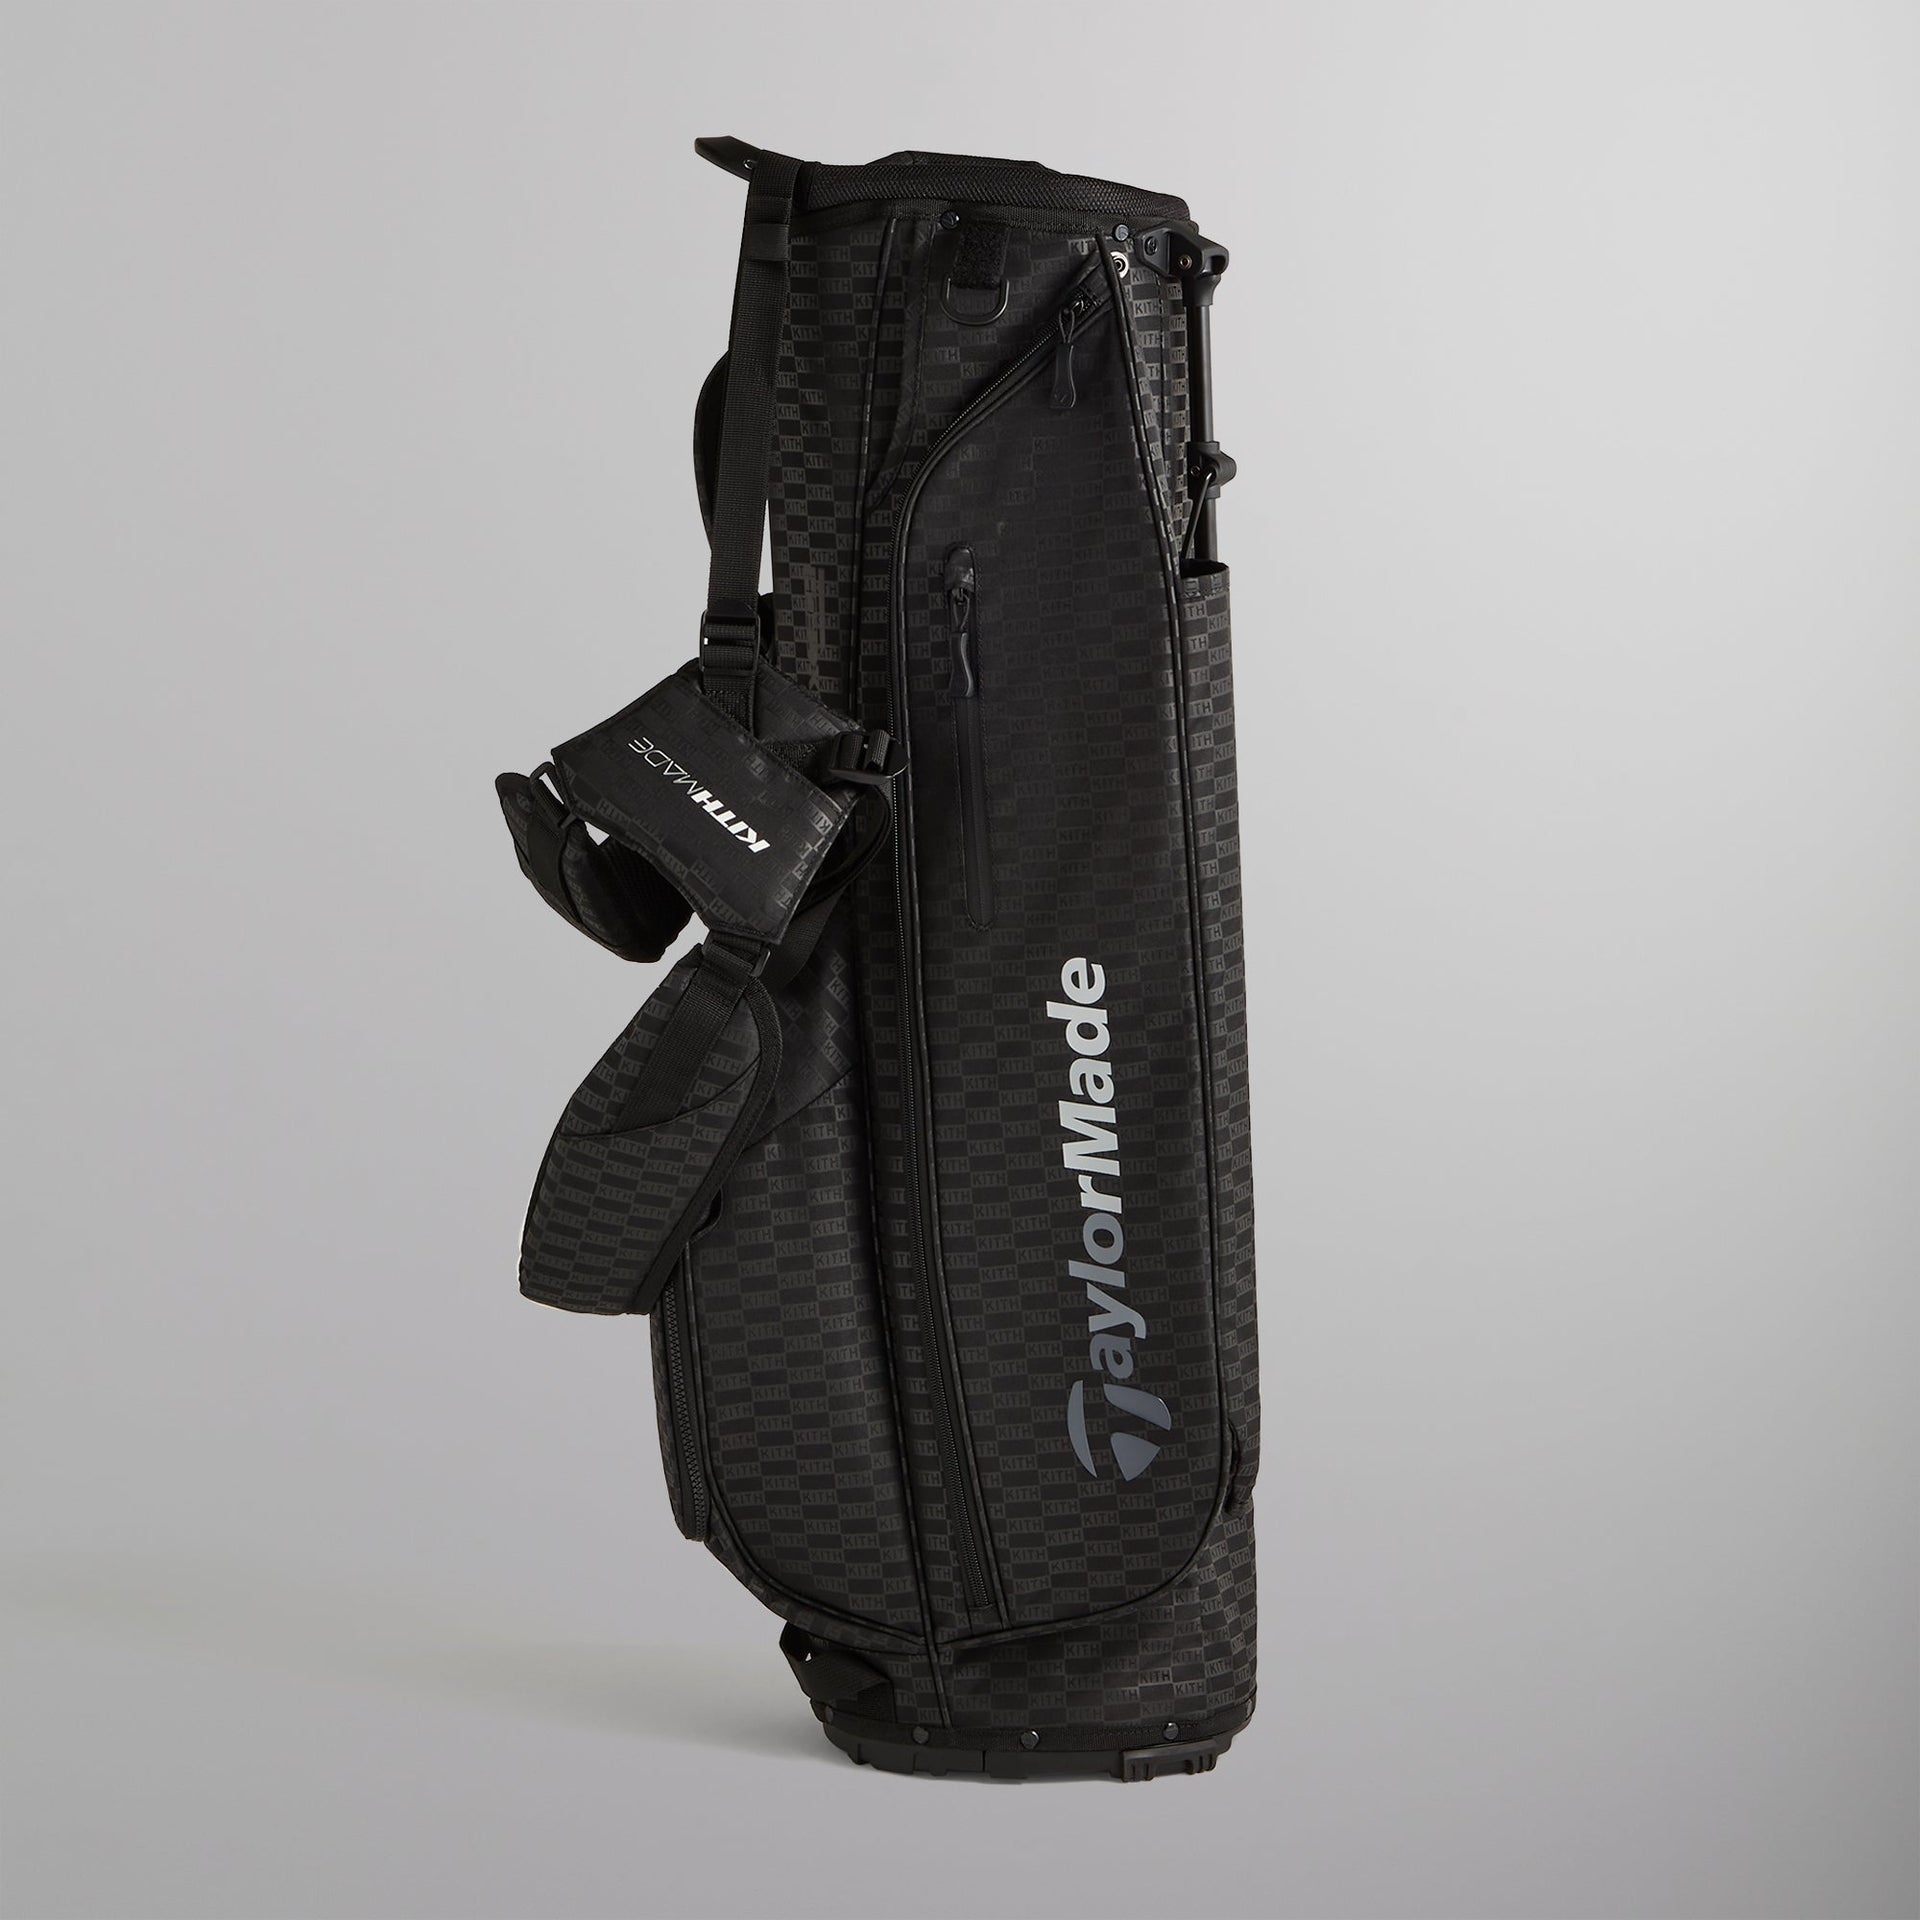 Kith for TaylorMade Flextech Stand Bag - Black PH